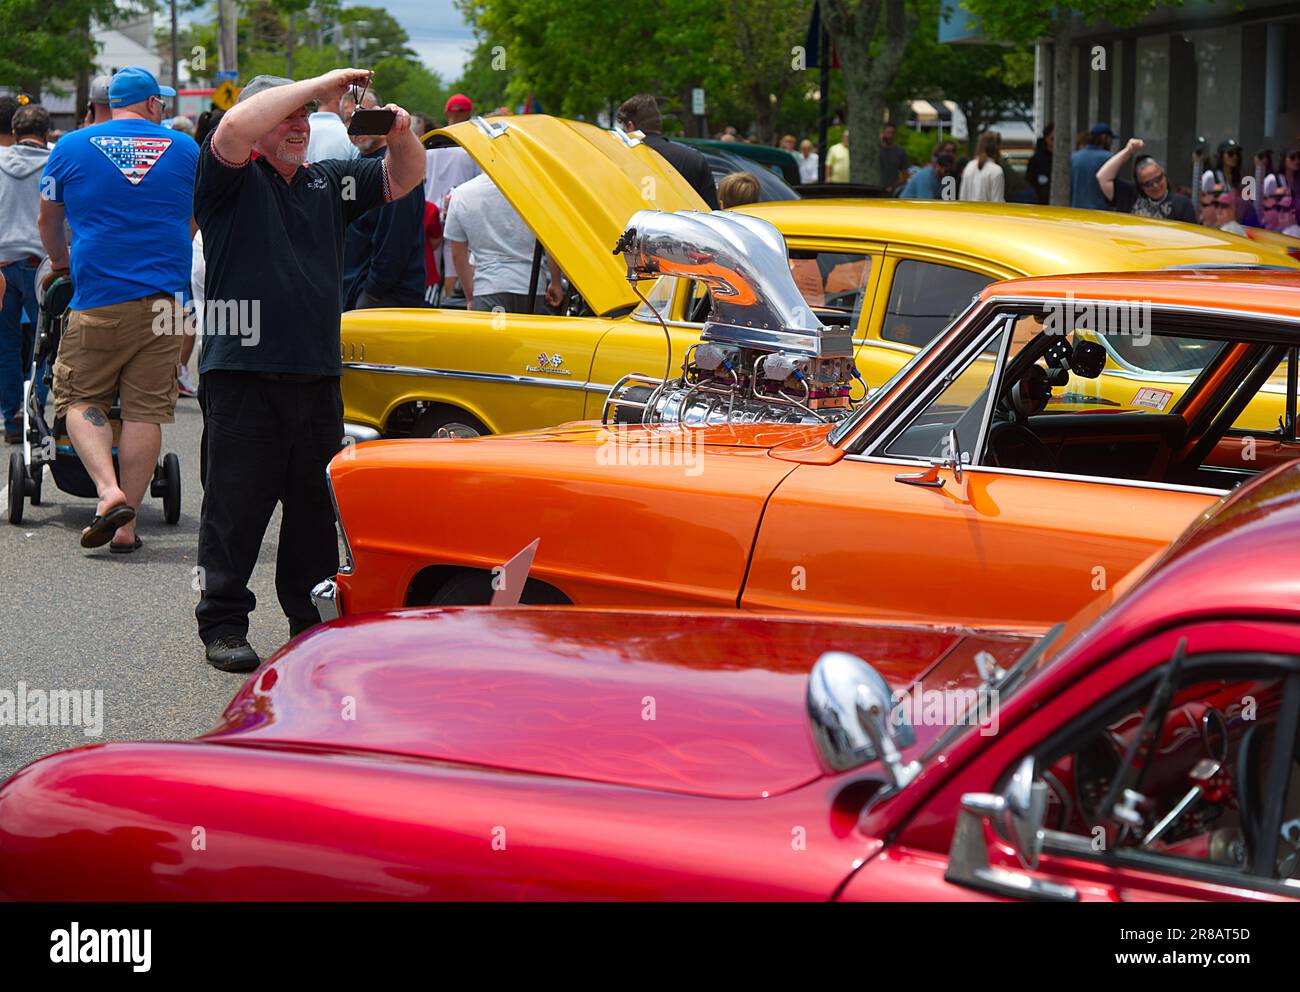 Father's Day Auto Show - Hyannis, Massachusetts, Cape Cod - USA. A man videos autos on display with his I Phone. Stock Photo